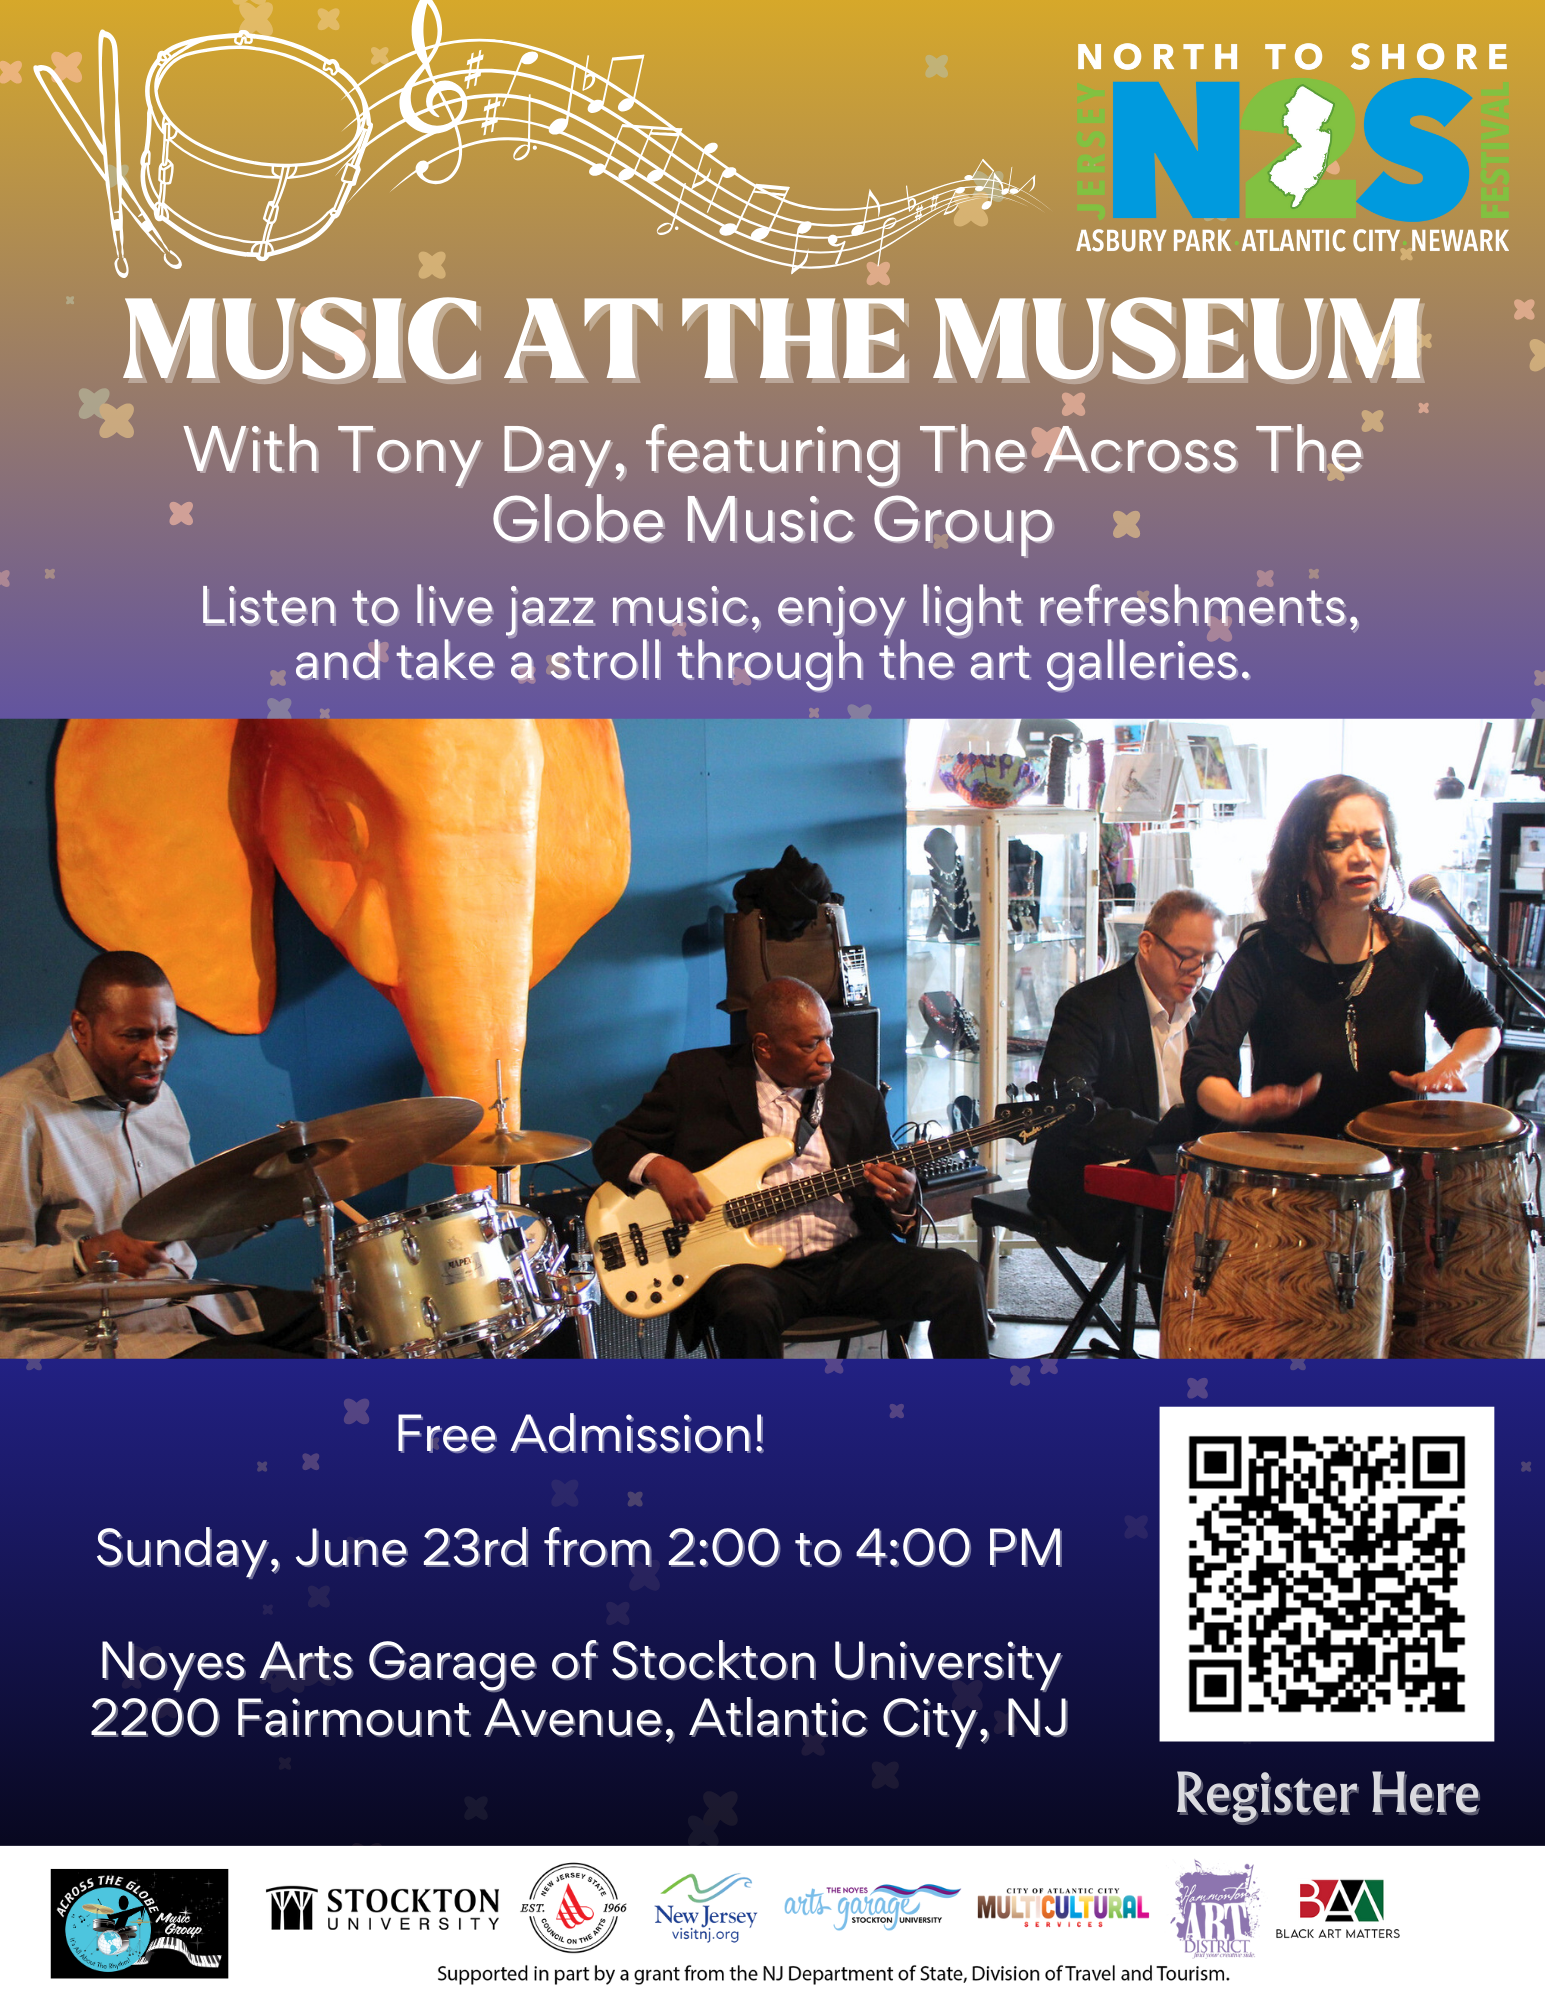 Music at the Museum with Tony Day flyer.png